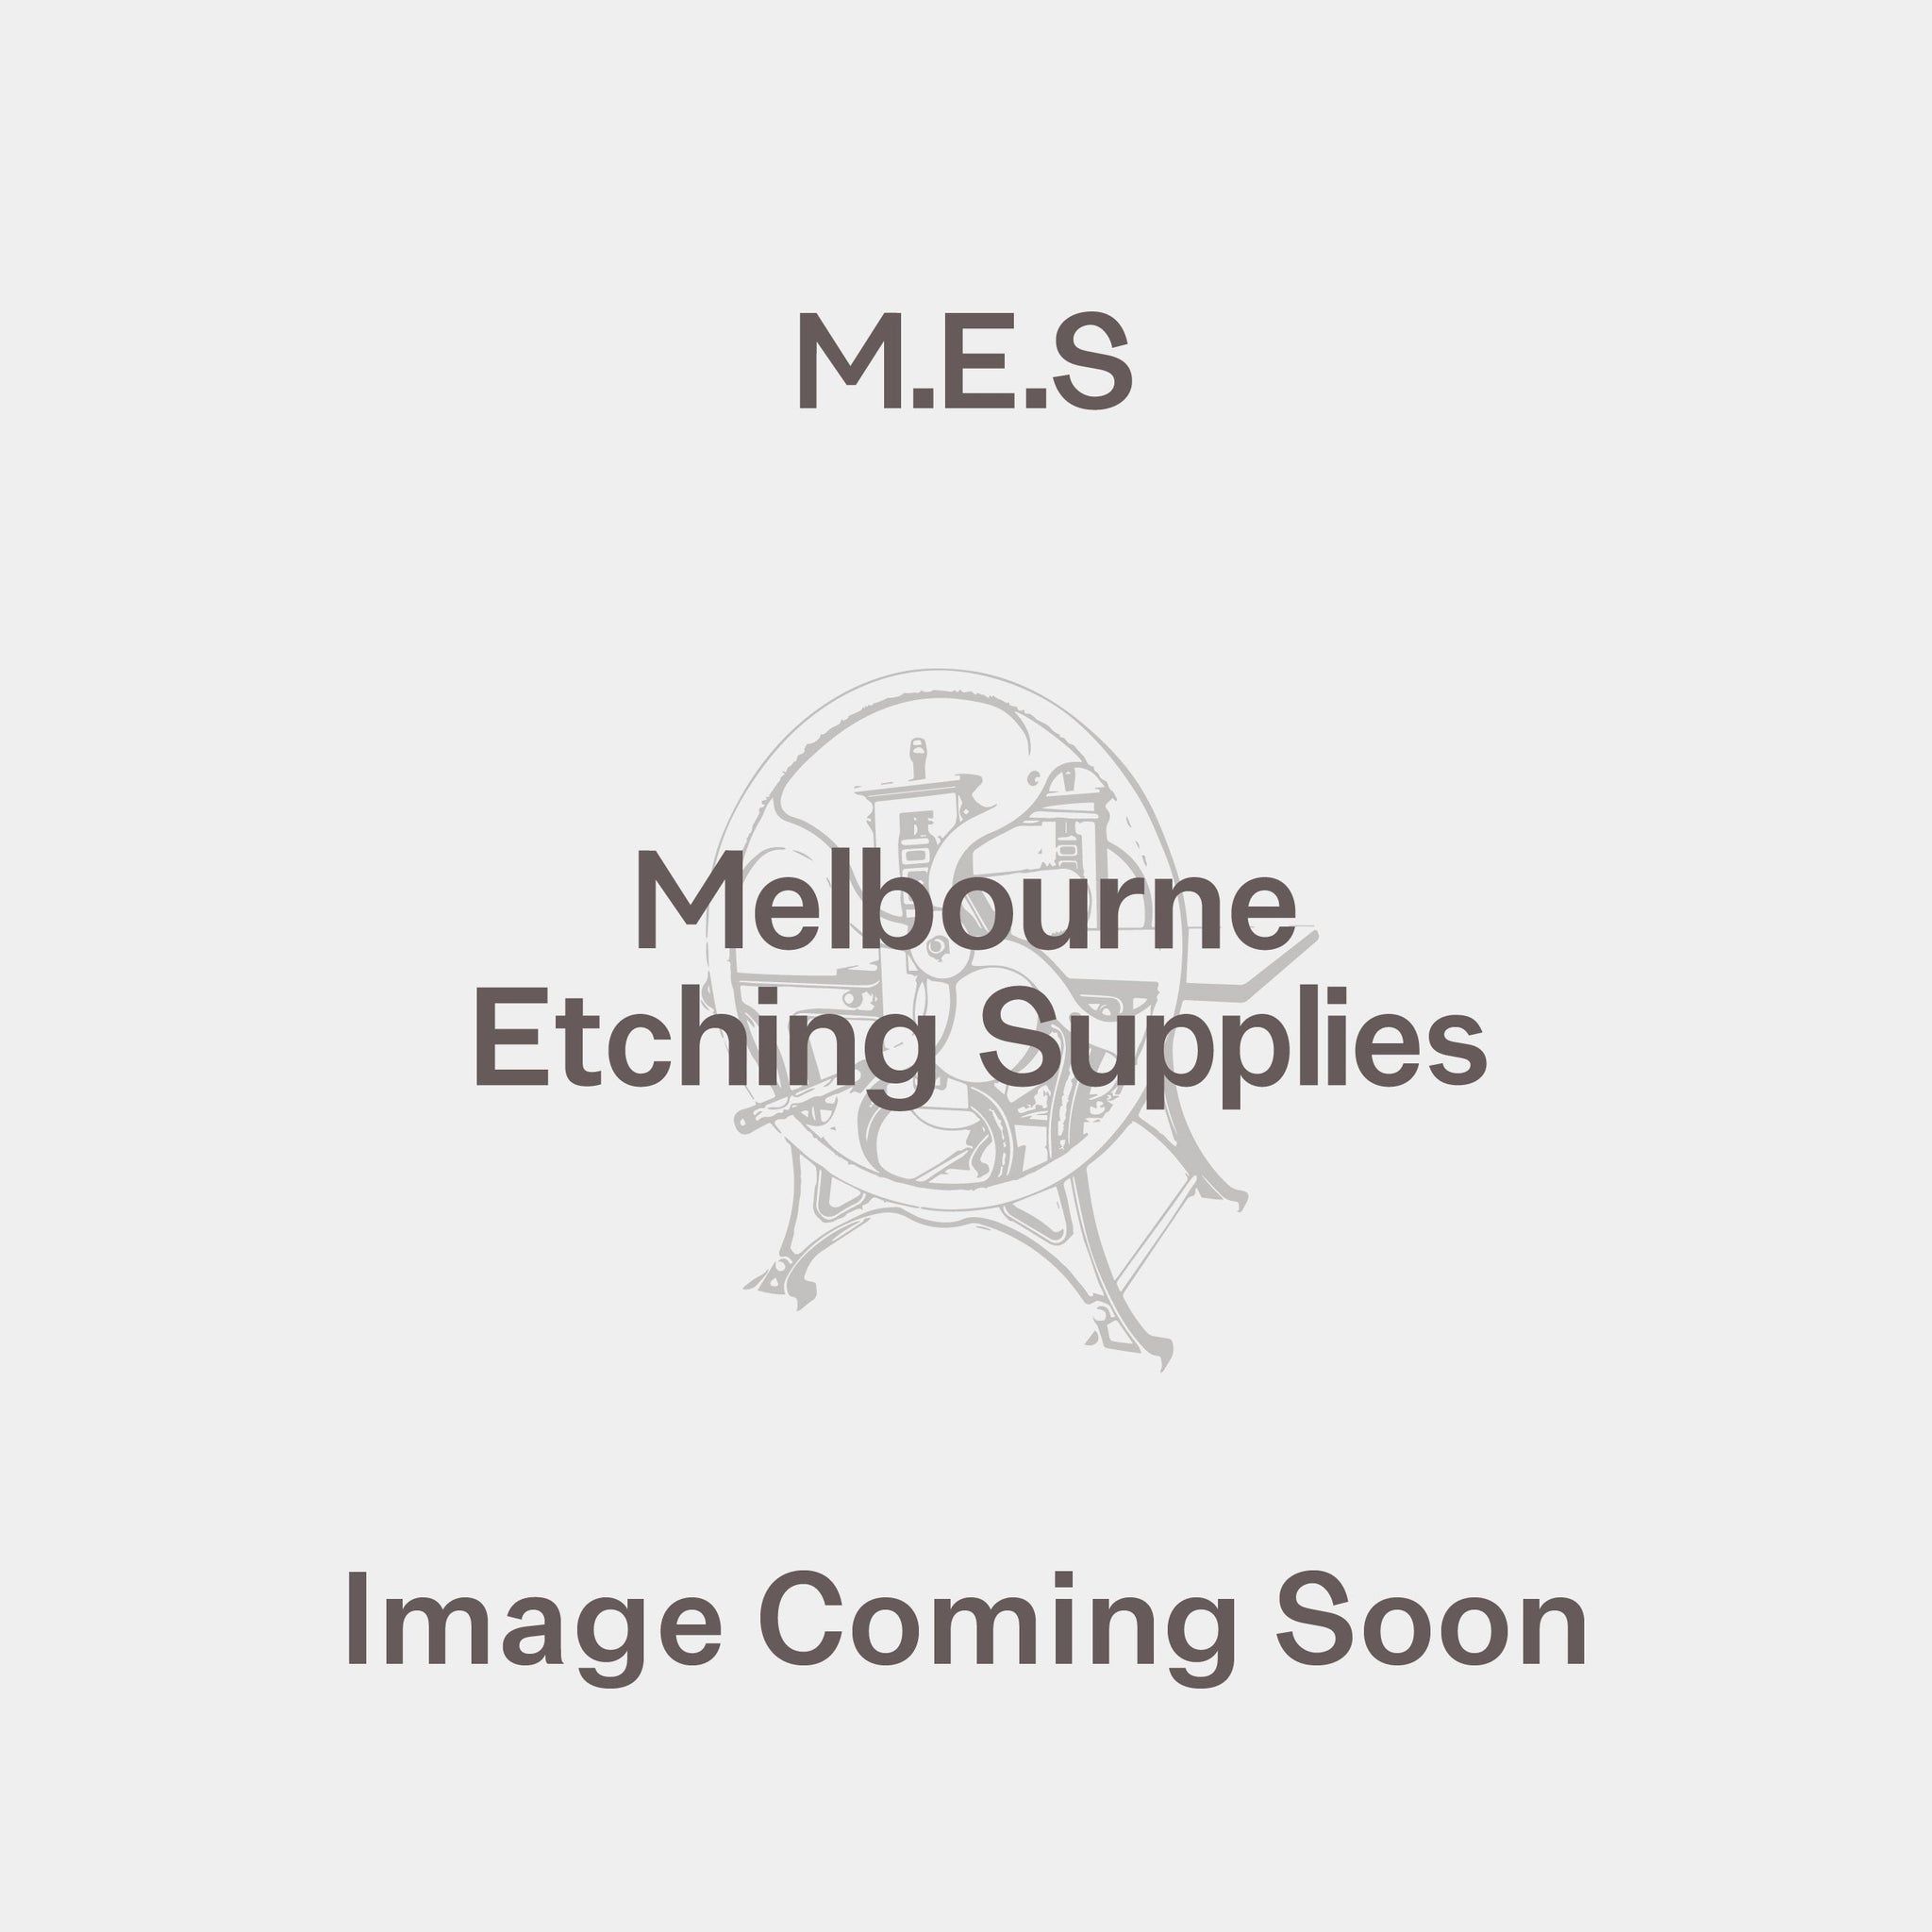 Yuppo Synthetic 100gm 1091x788 mm - Melbourne Etching Supplies